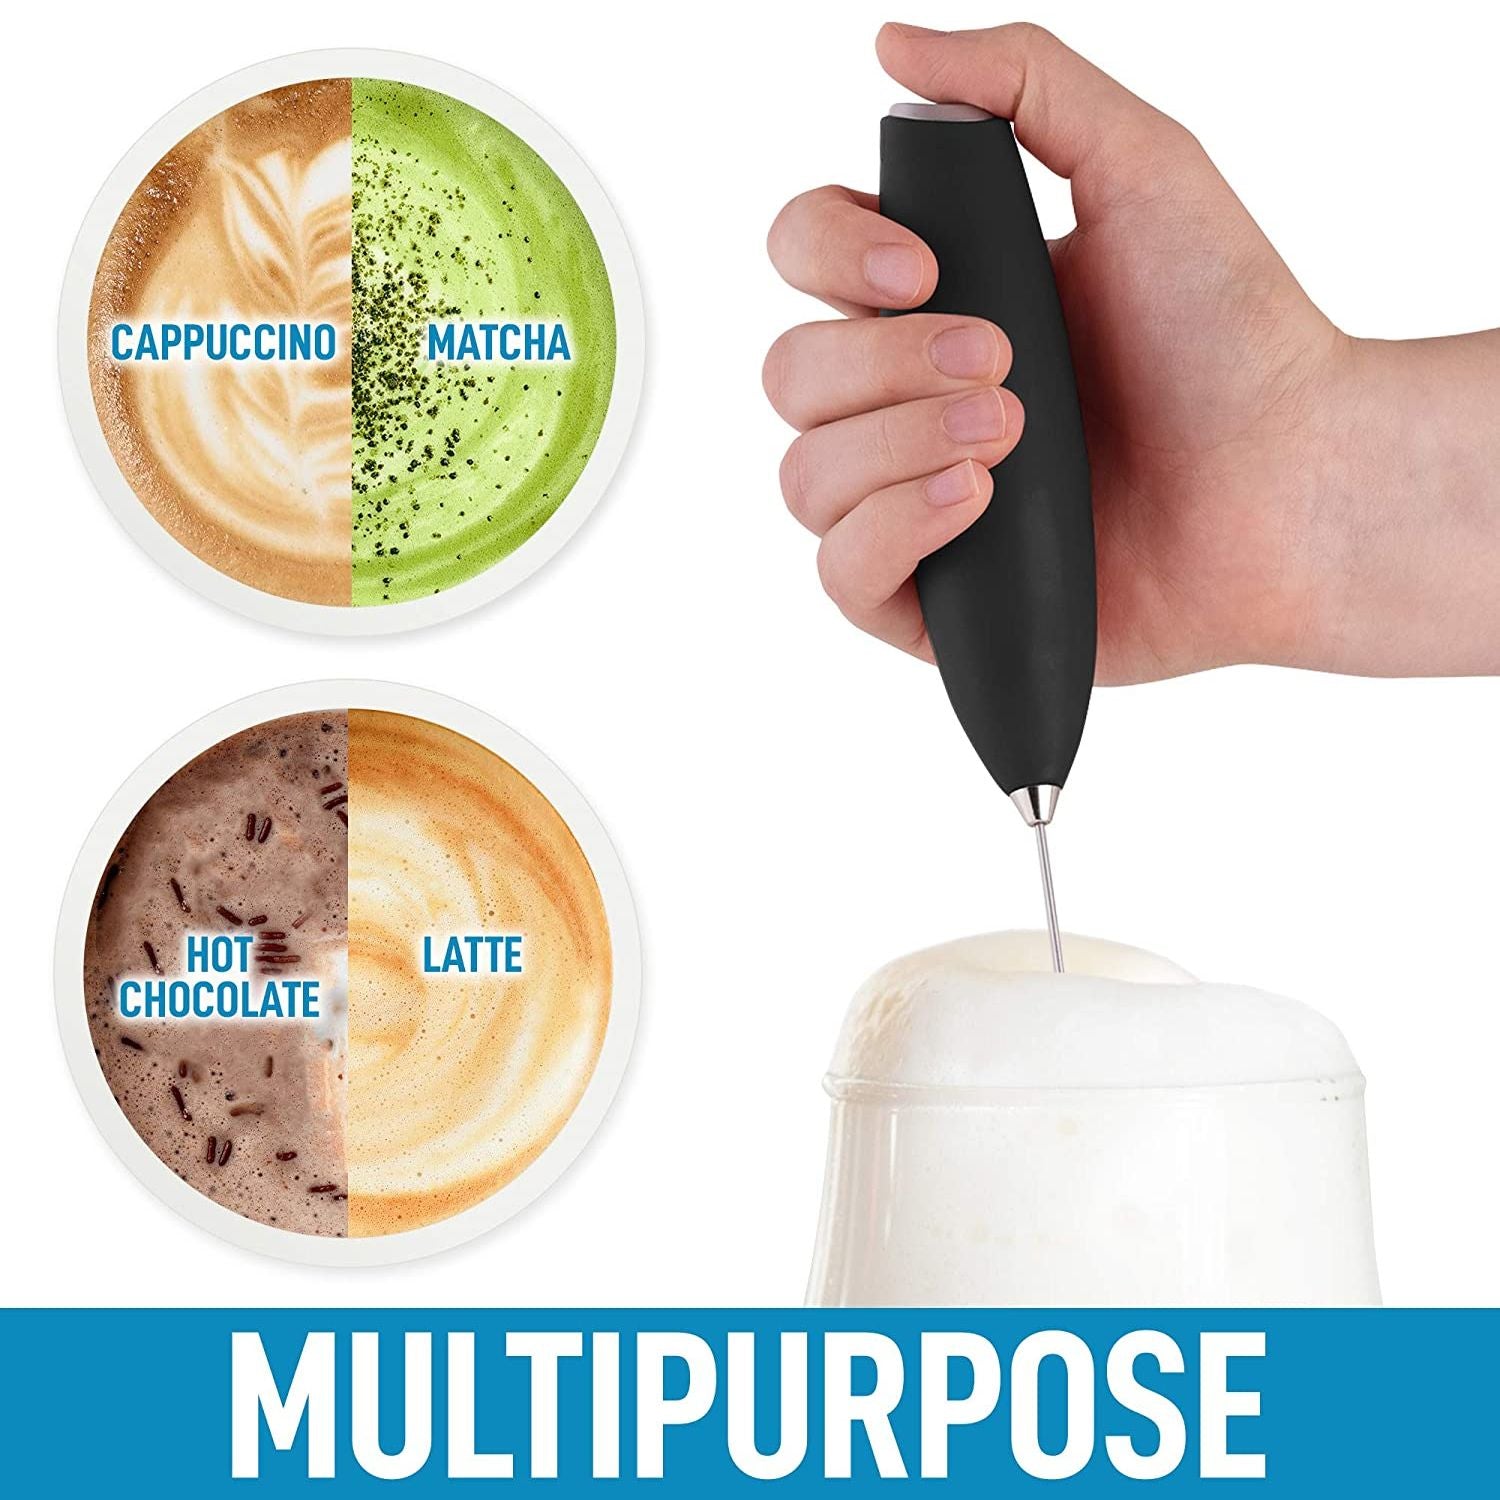 Zulay Kitchen Milk Boss Milk Frother with Holster Stand - Teal